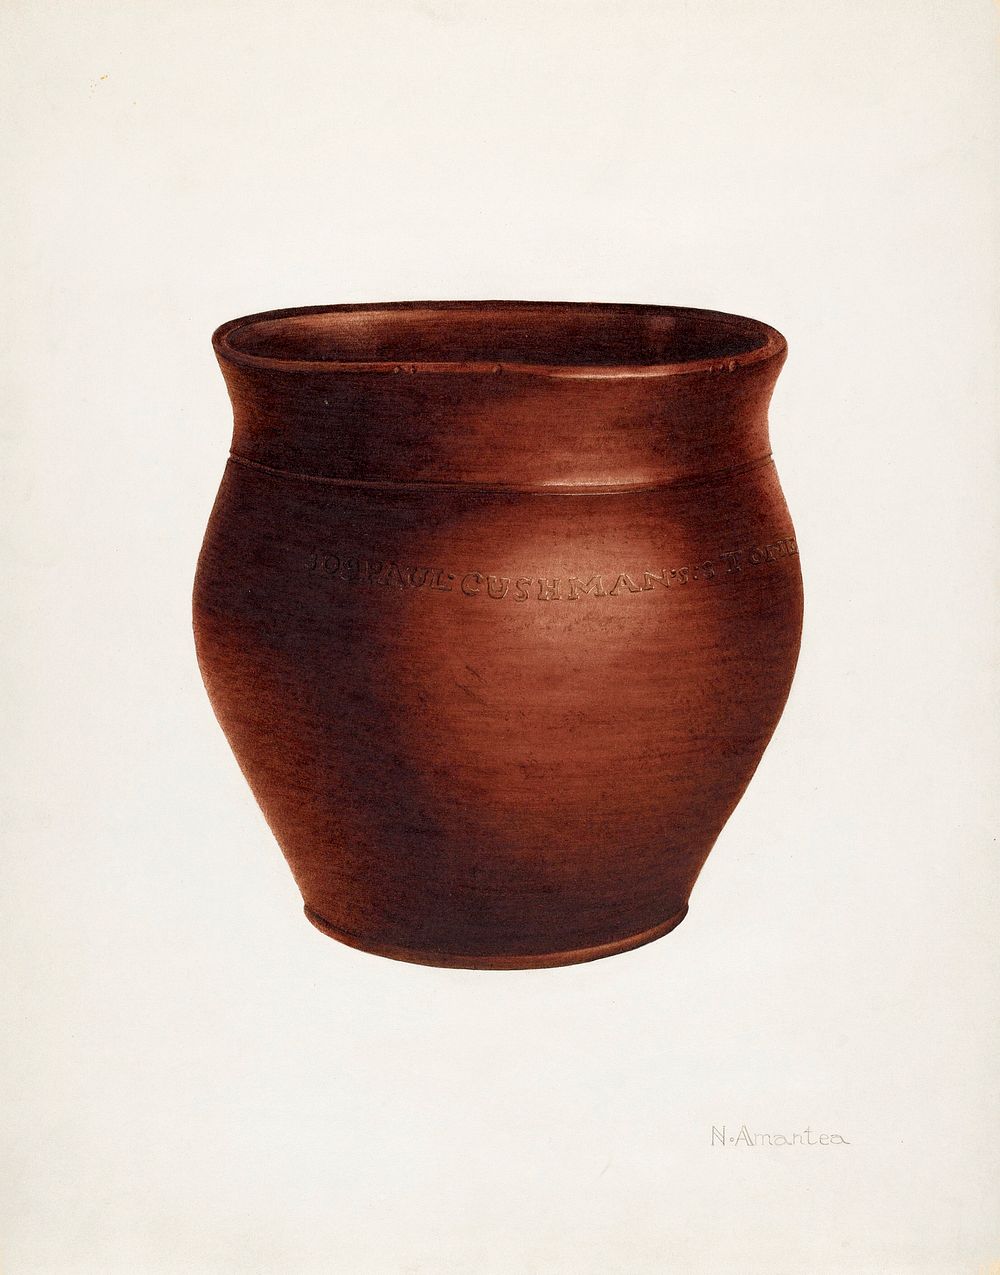 Pot (ca.1938) by Nicholas Amantea. Original from The National Gallery of Art. Digitally enhanced by rawpixel.